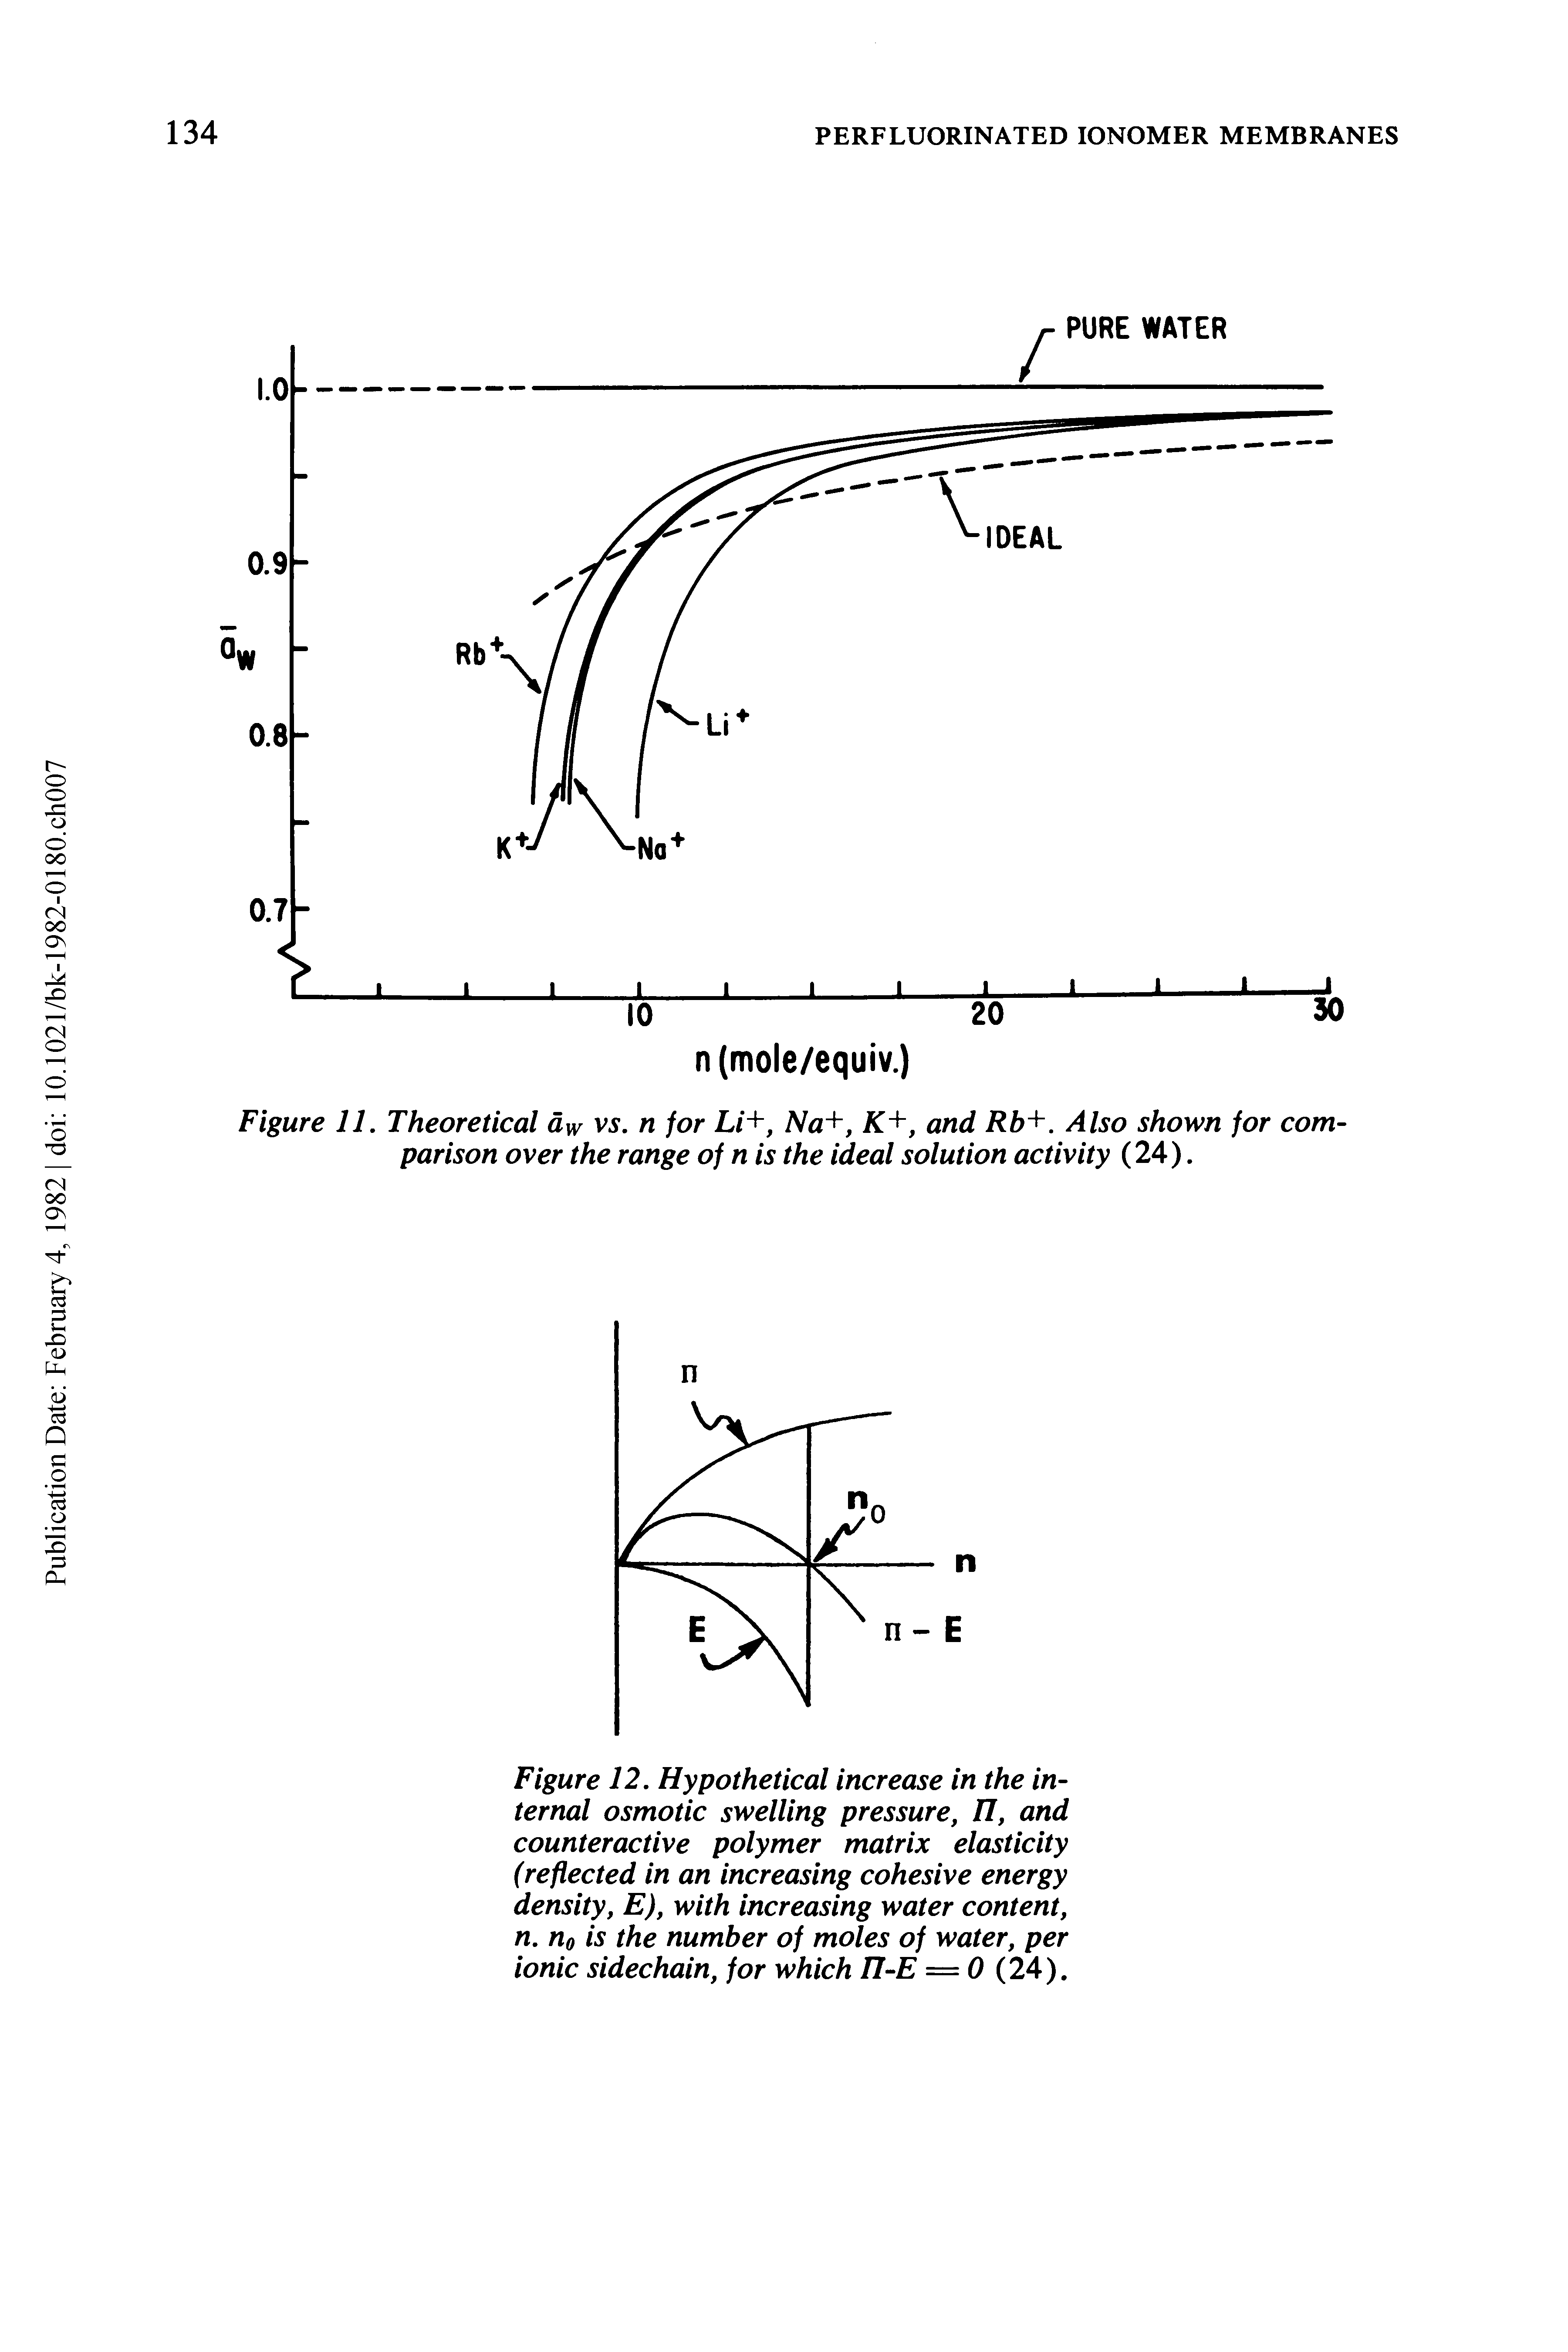 Figure 12. Hypothetical increase in the internal osmotic swelling pressure, II, and counteractive polymer matrix elasticity (reflected in an increasing cohesive energy density, E), with increasing water content, n. n0 is the number of moles of water, per ionic sidechain, for which Tl-E = 0 (24).